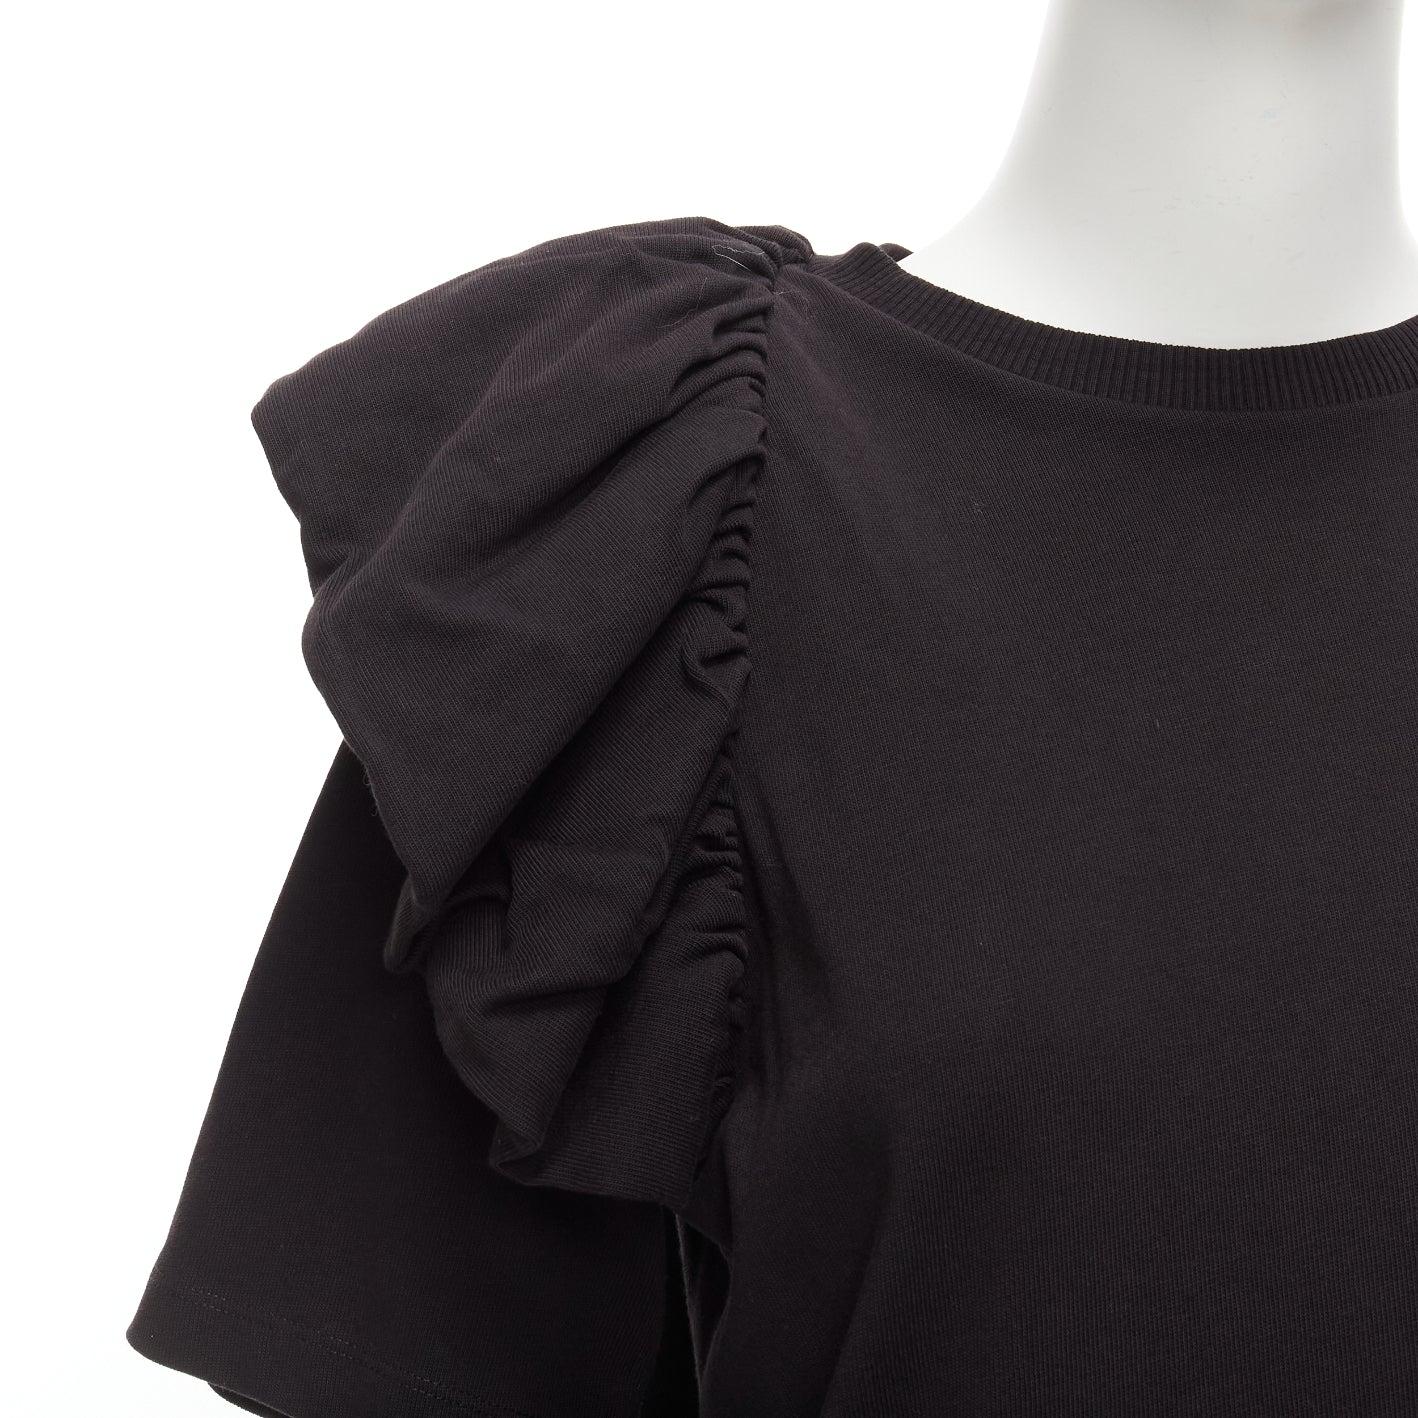 DRIES VAN NOTEN black cotton asymmetric ruffle half sleeve boxy top S
Reference: DYTG/A00020
Brand: Dries Van Noten
Material: Cotton
Color: Black
Pattern: Solid
Closure: Pullover
Made in: Turkey

CONDITION:
Condition: Excellent, this item was